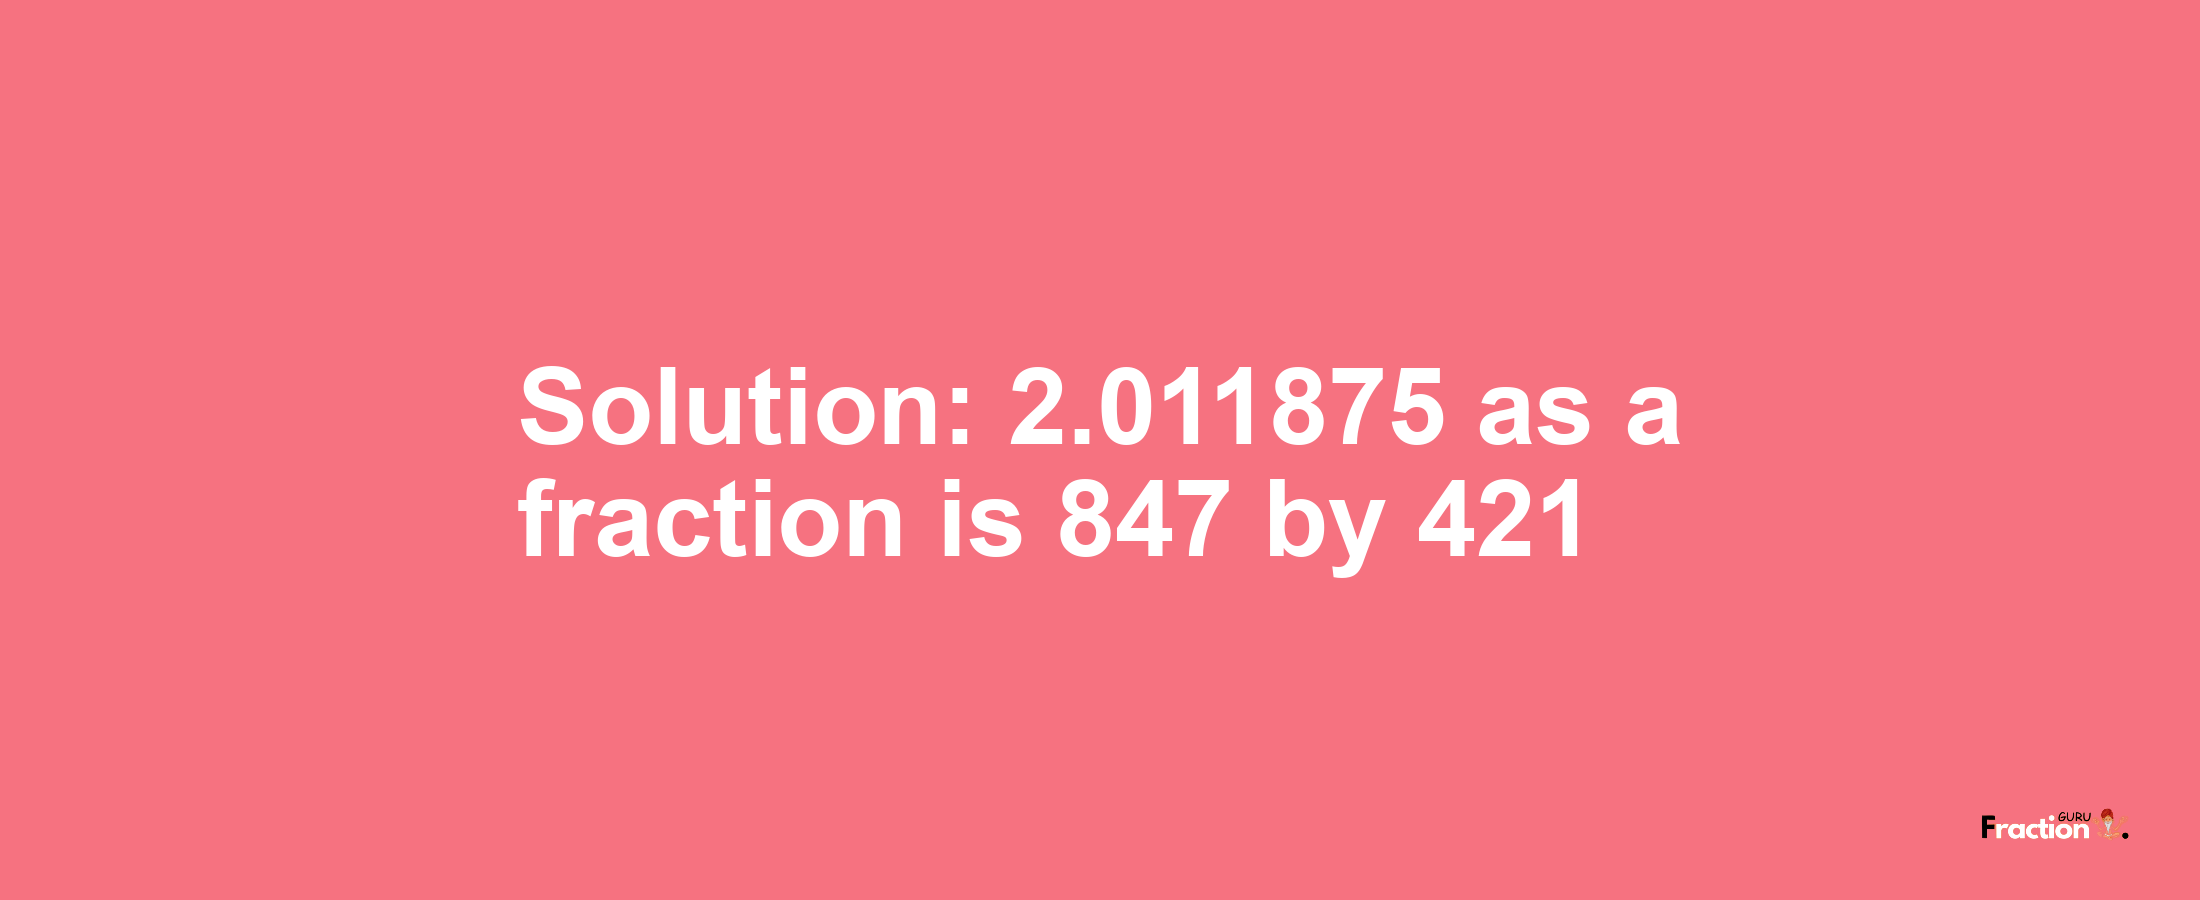 Solution:2.011875 as a fraction is 847/421